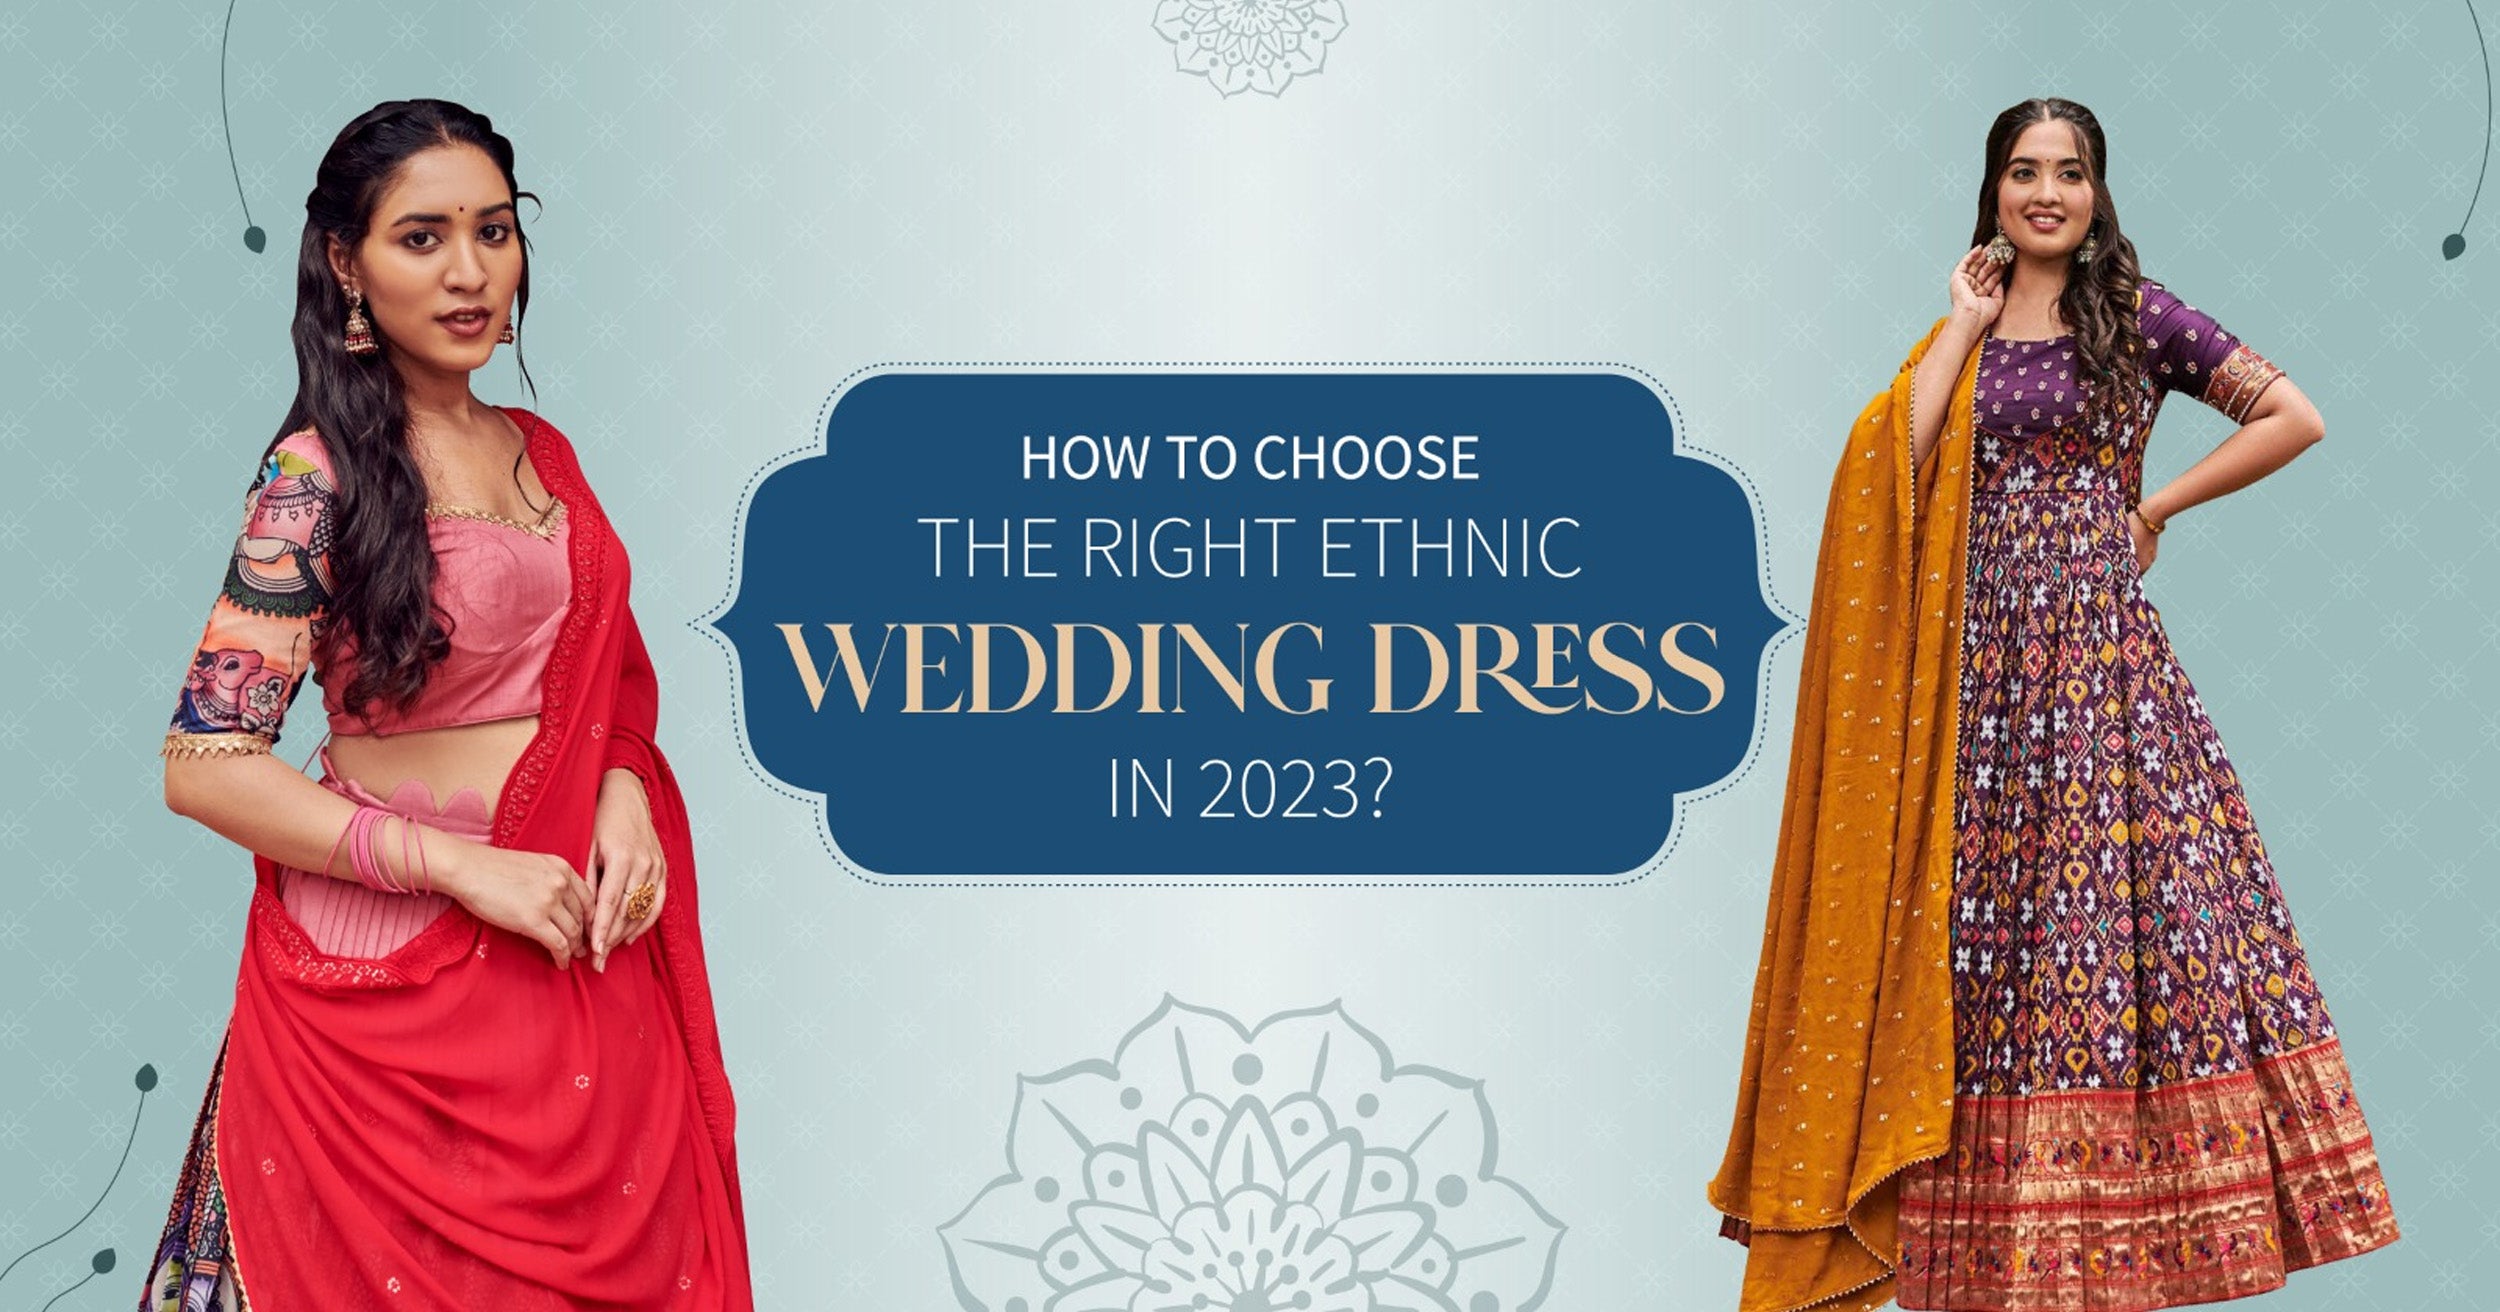 HOW TO CHOOSE THE RIGHT ETHNIC WEDDING DRESS IN 2023